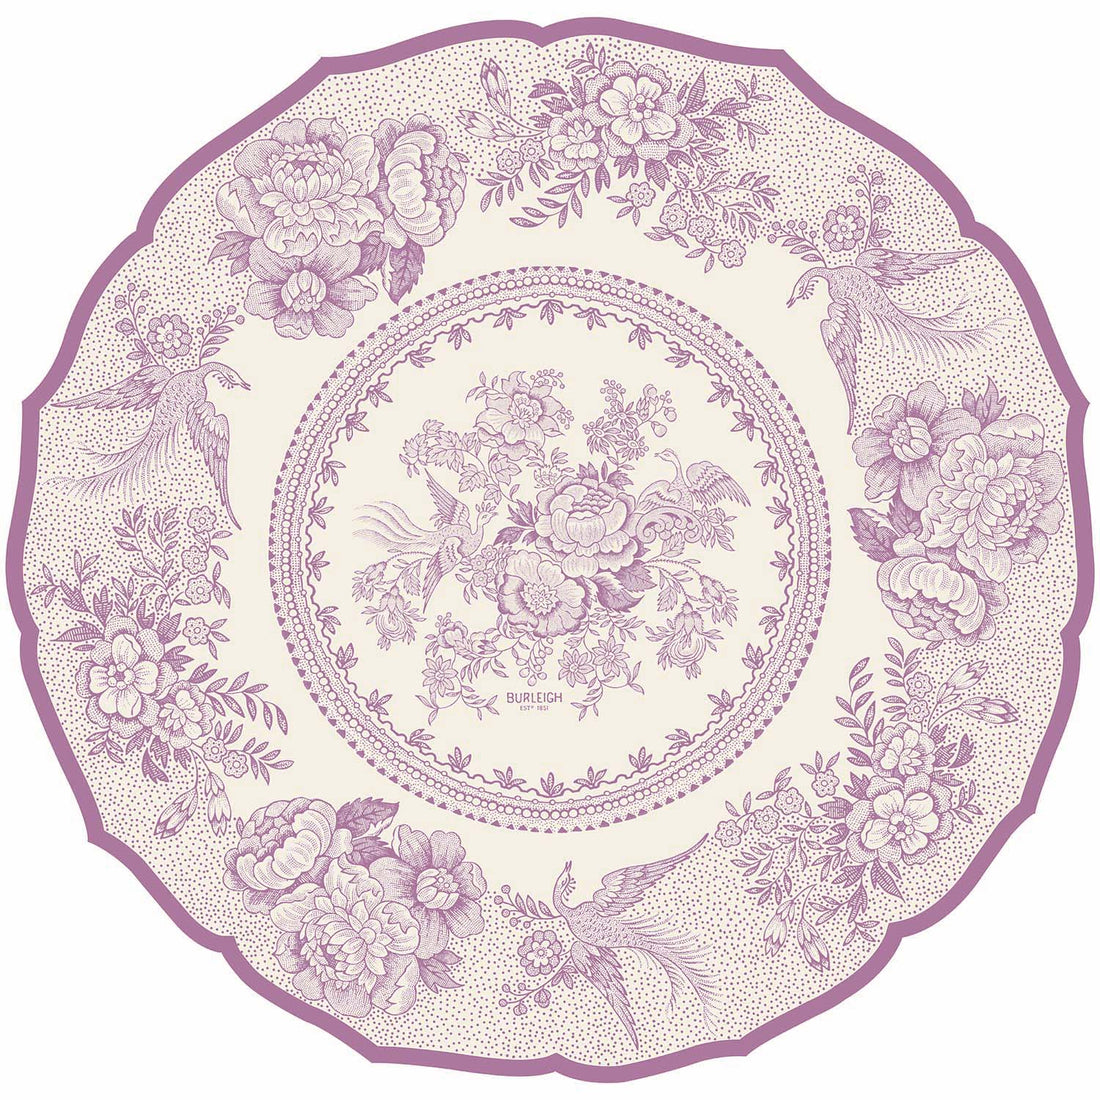 A Die-cut Lilac Asiatic Pheasants Placemat with a floral design by Hester &amp; Cook.